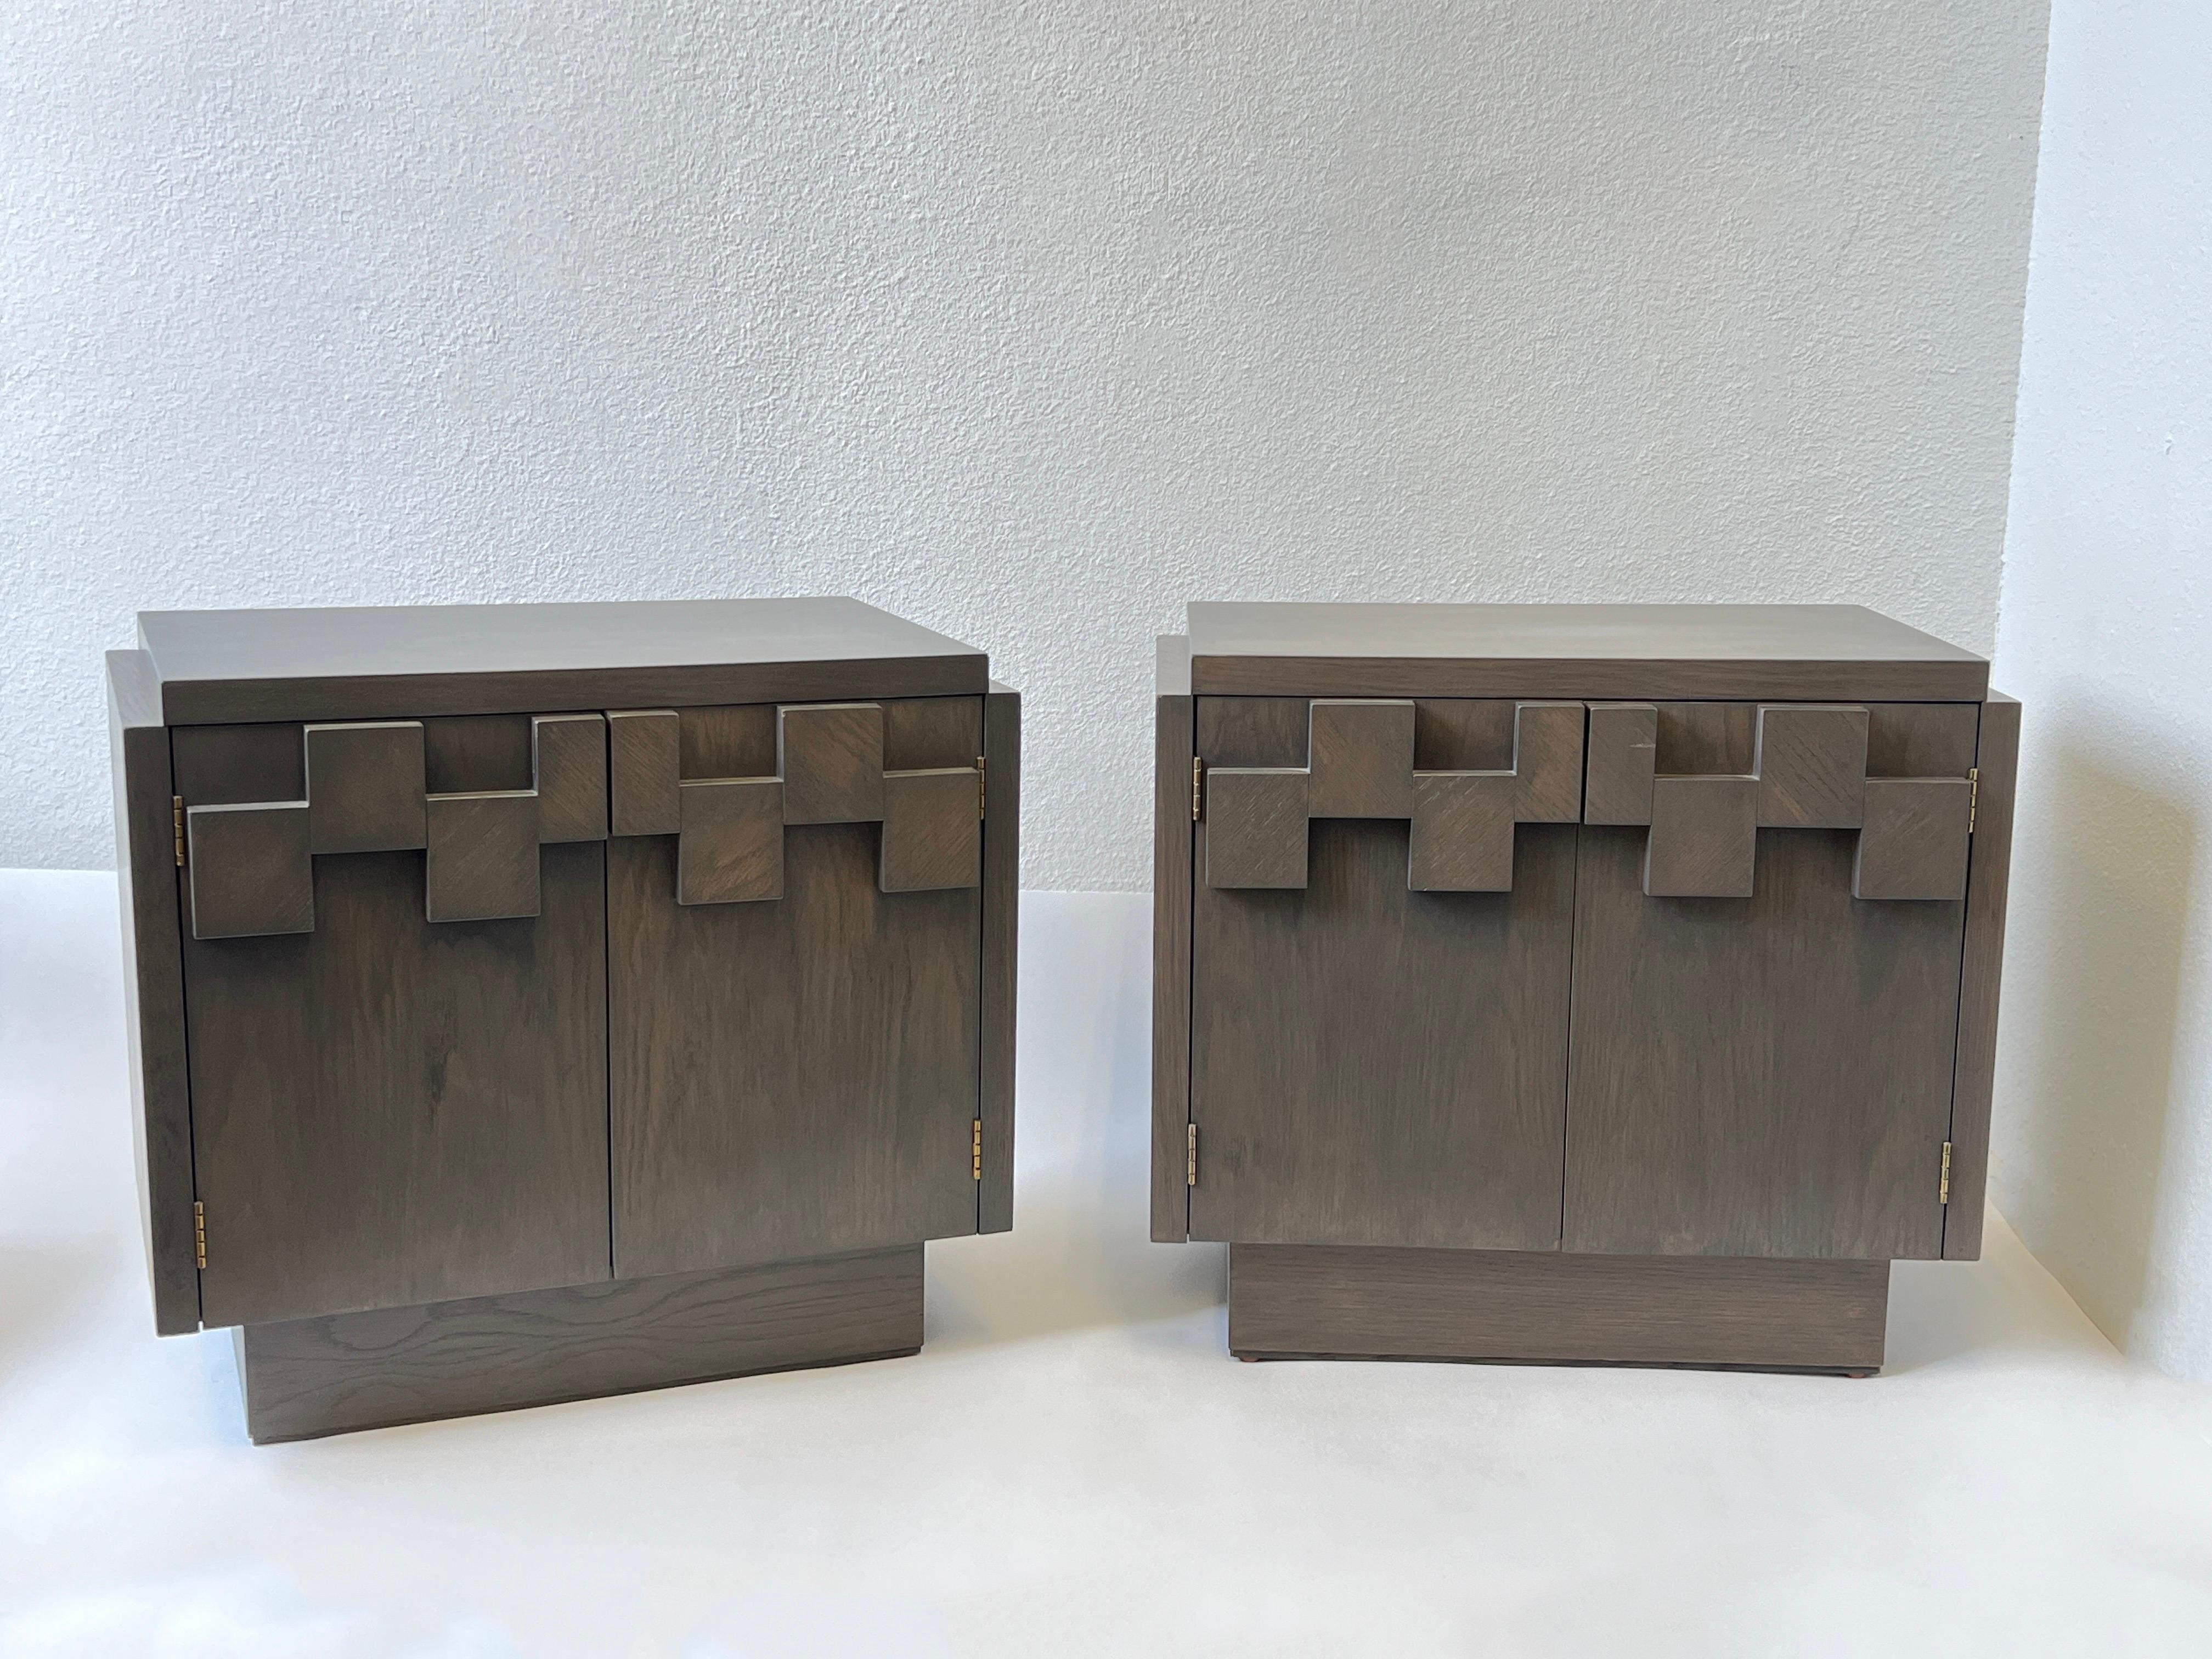 1970’s Pair light gray lacquered oak nightstands by Lane Furniture. 
They are as found condition. They were previously lacquered in light gray wash oak finish. 
Shows minor wear consistent with age. 
The two doors expose a shelf inside.